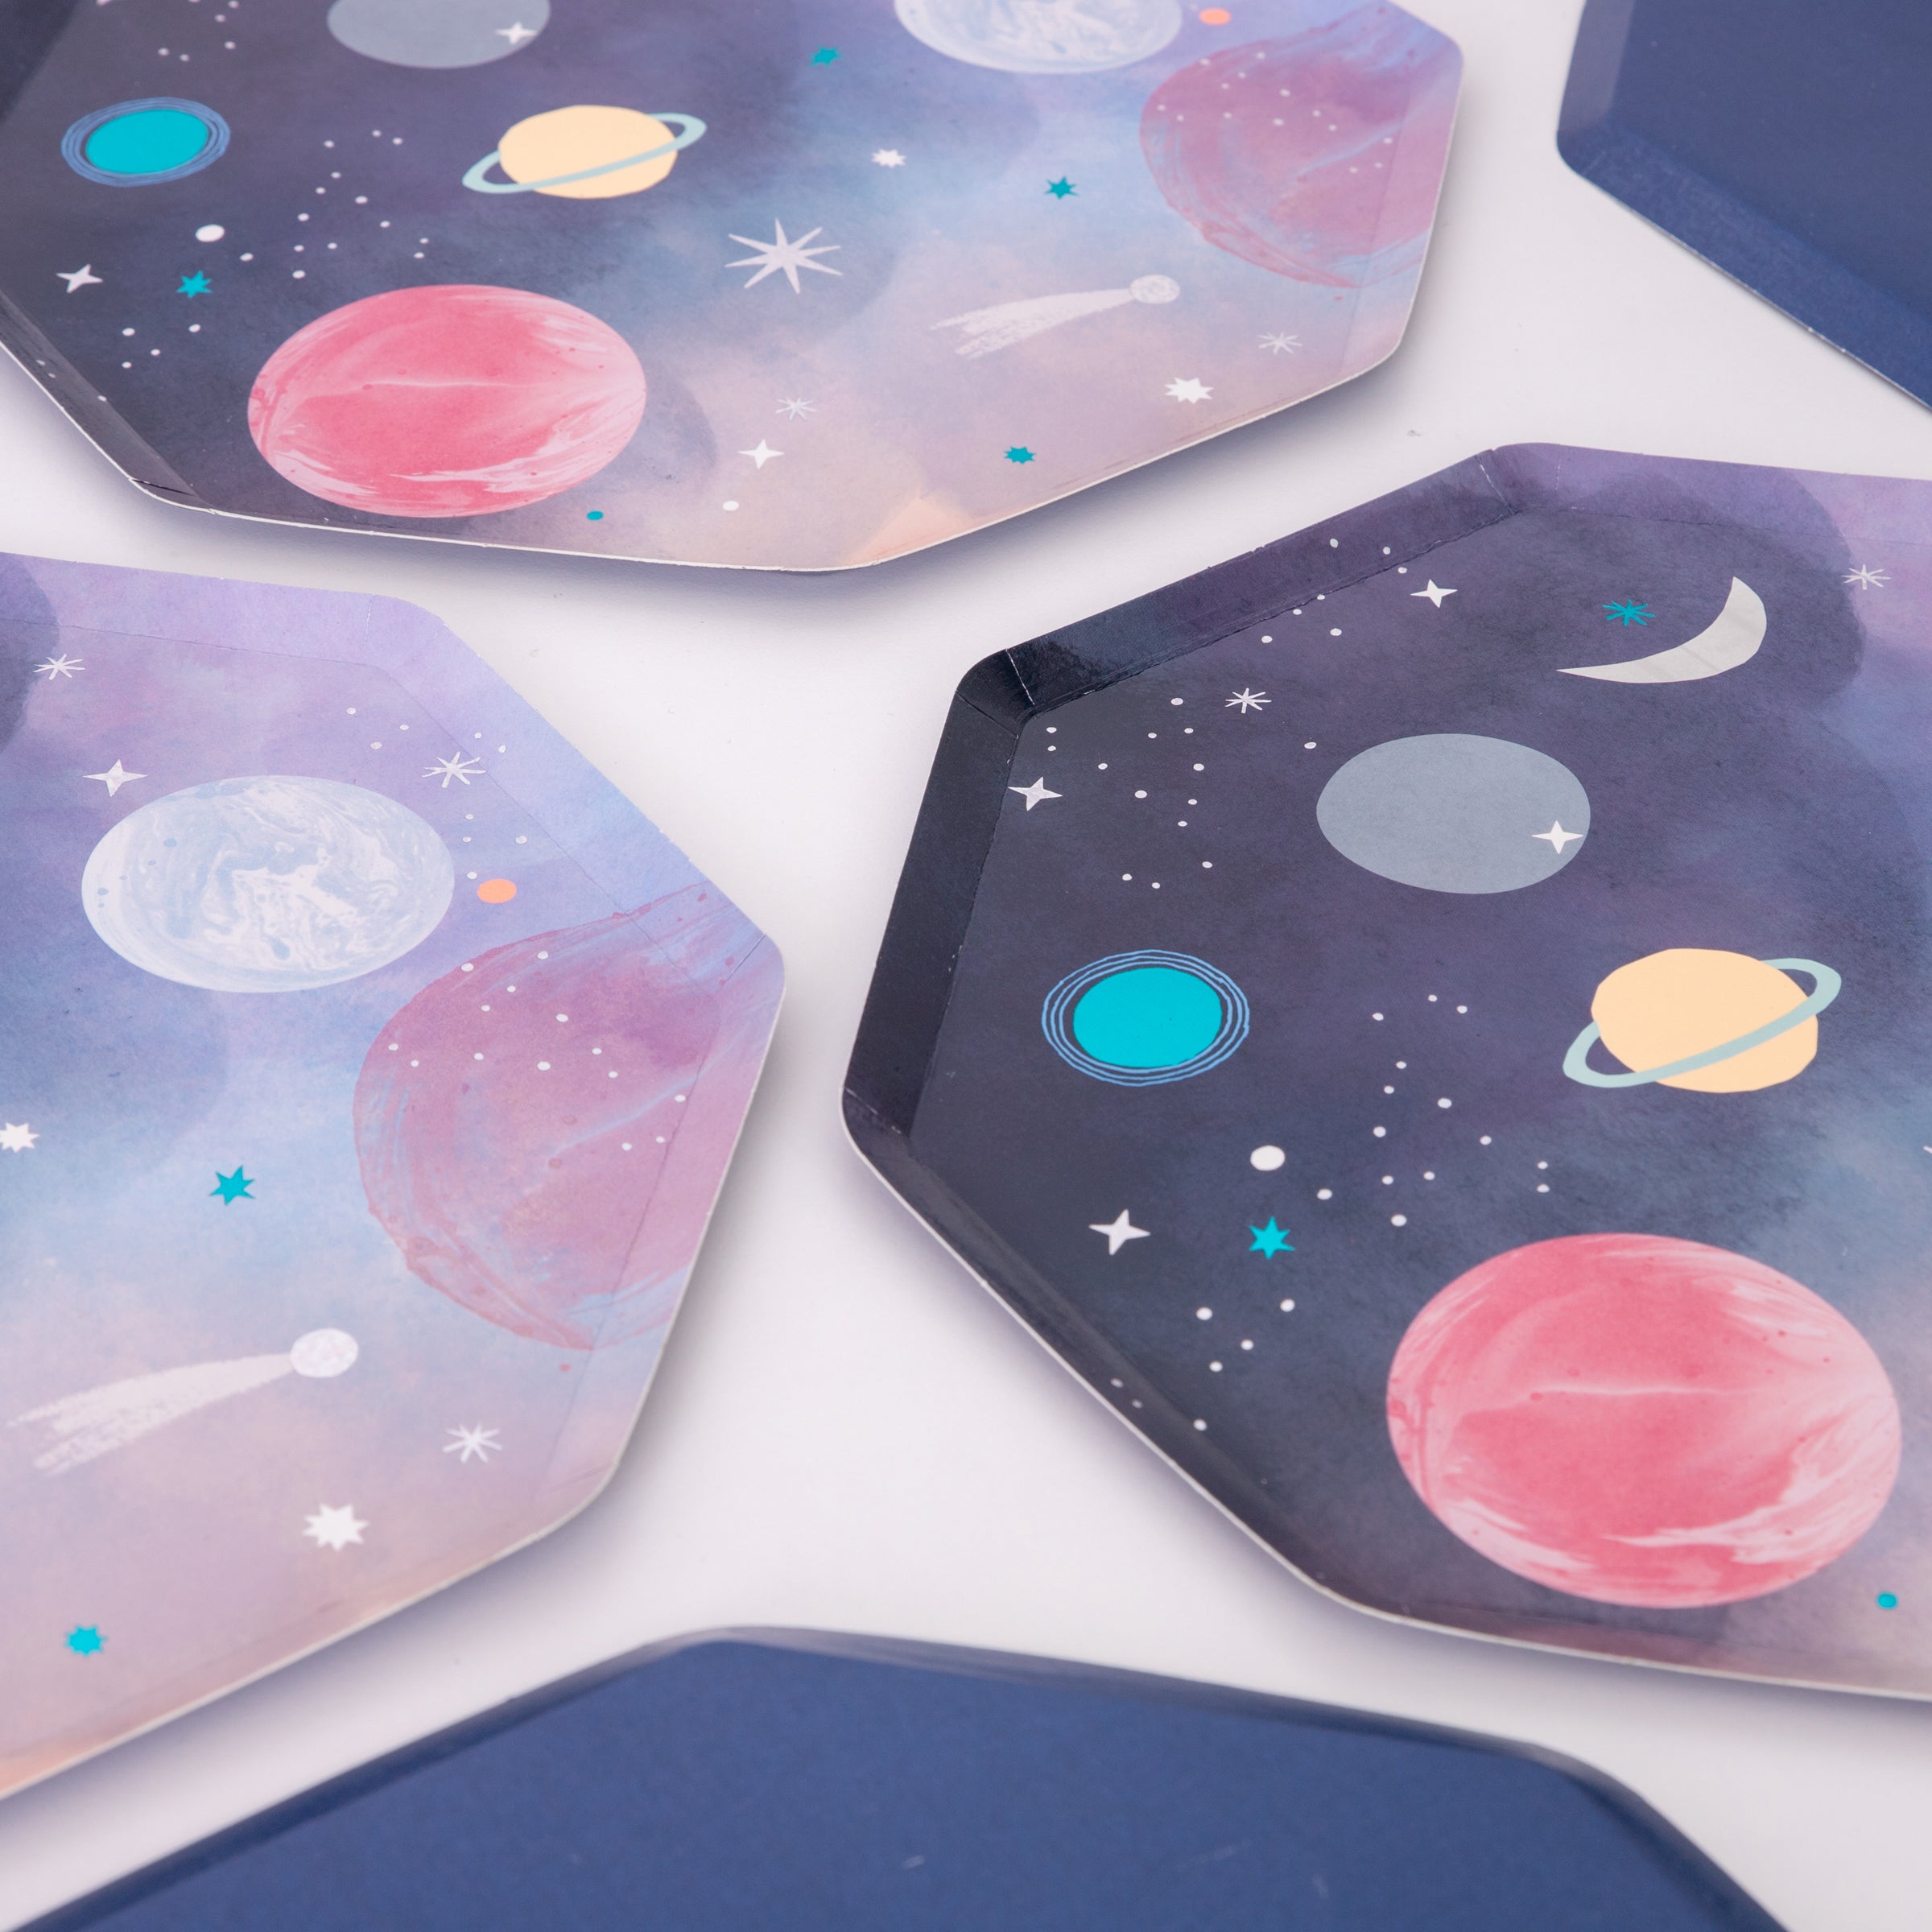 Our paper plates feature brightly colored planets and stars for an out-of-this world astronaut party.